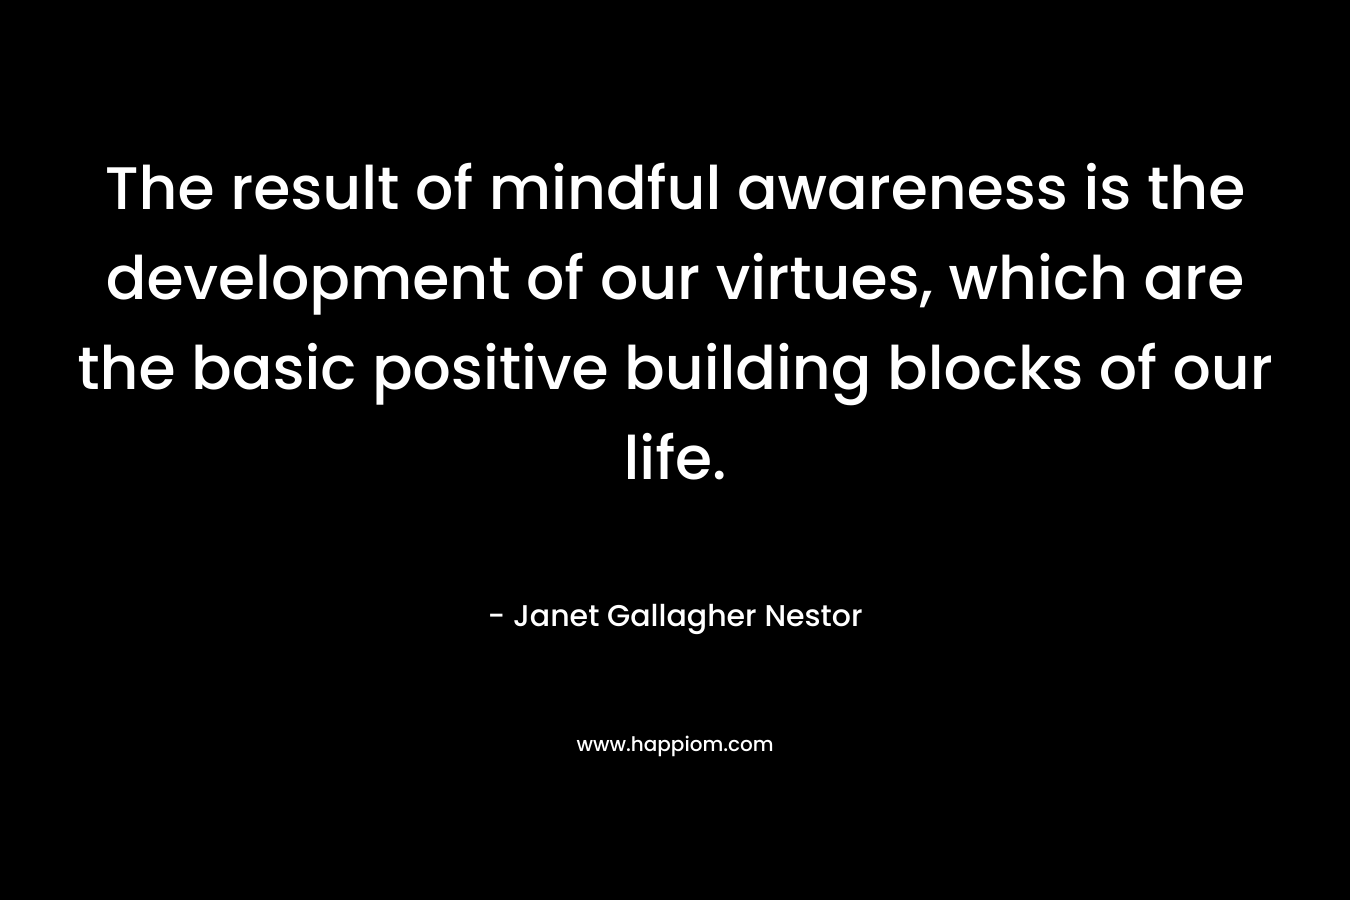 The result of mindful awareness is the development of our virtues, which are the basic positive building blocks of our life. – Janet Gallagher Nestor